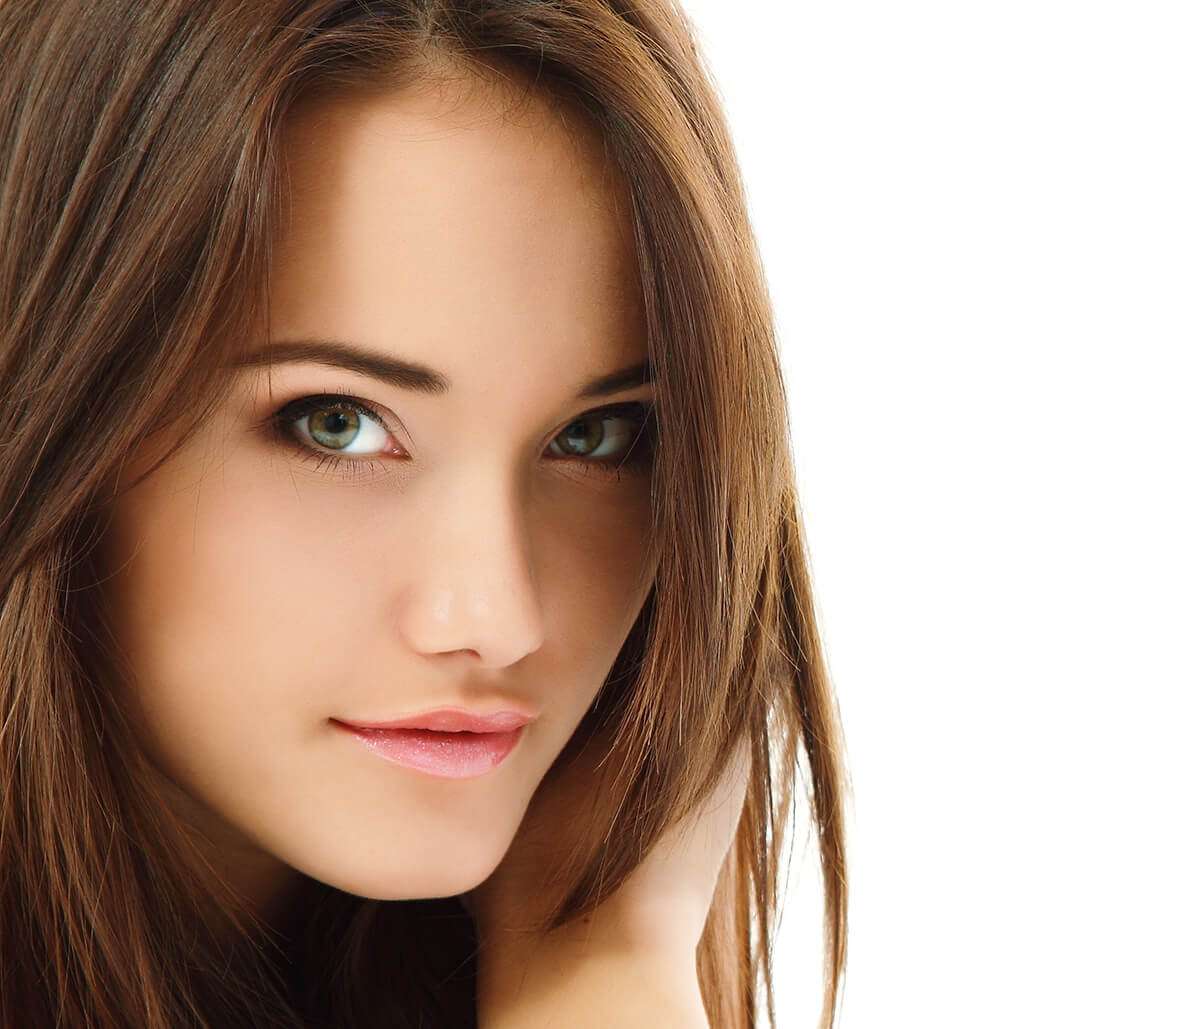 Enjoy Intense Pulsed Light Therapy to Improve the Skin’s Appearance with Washington, DA, Area Dermatologist